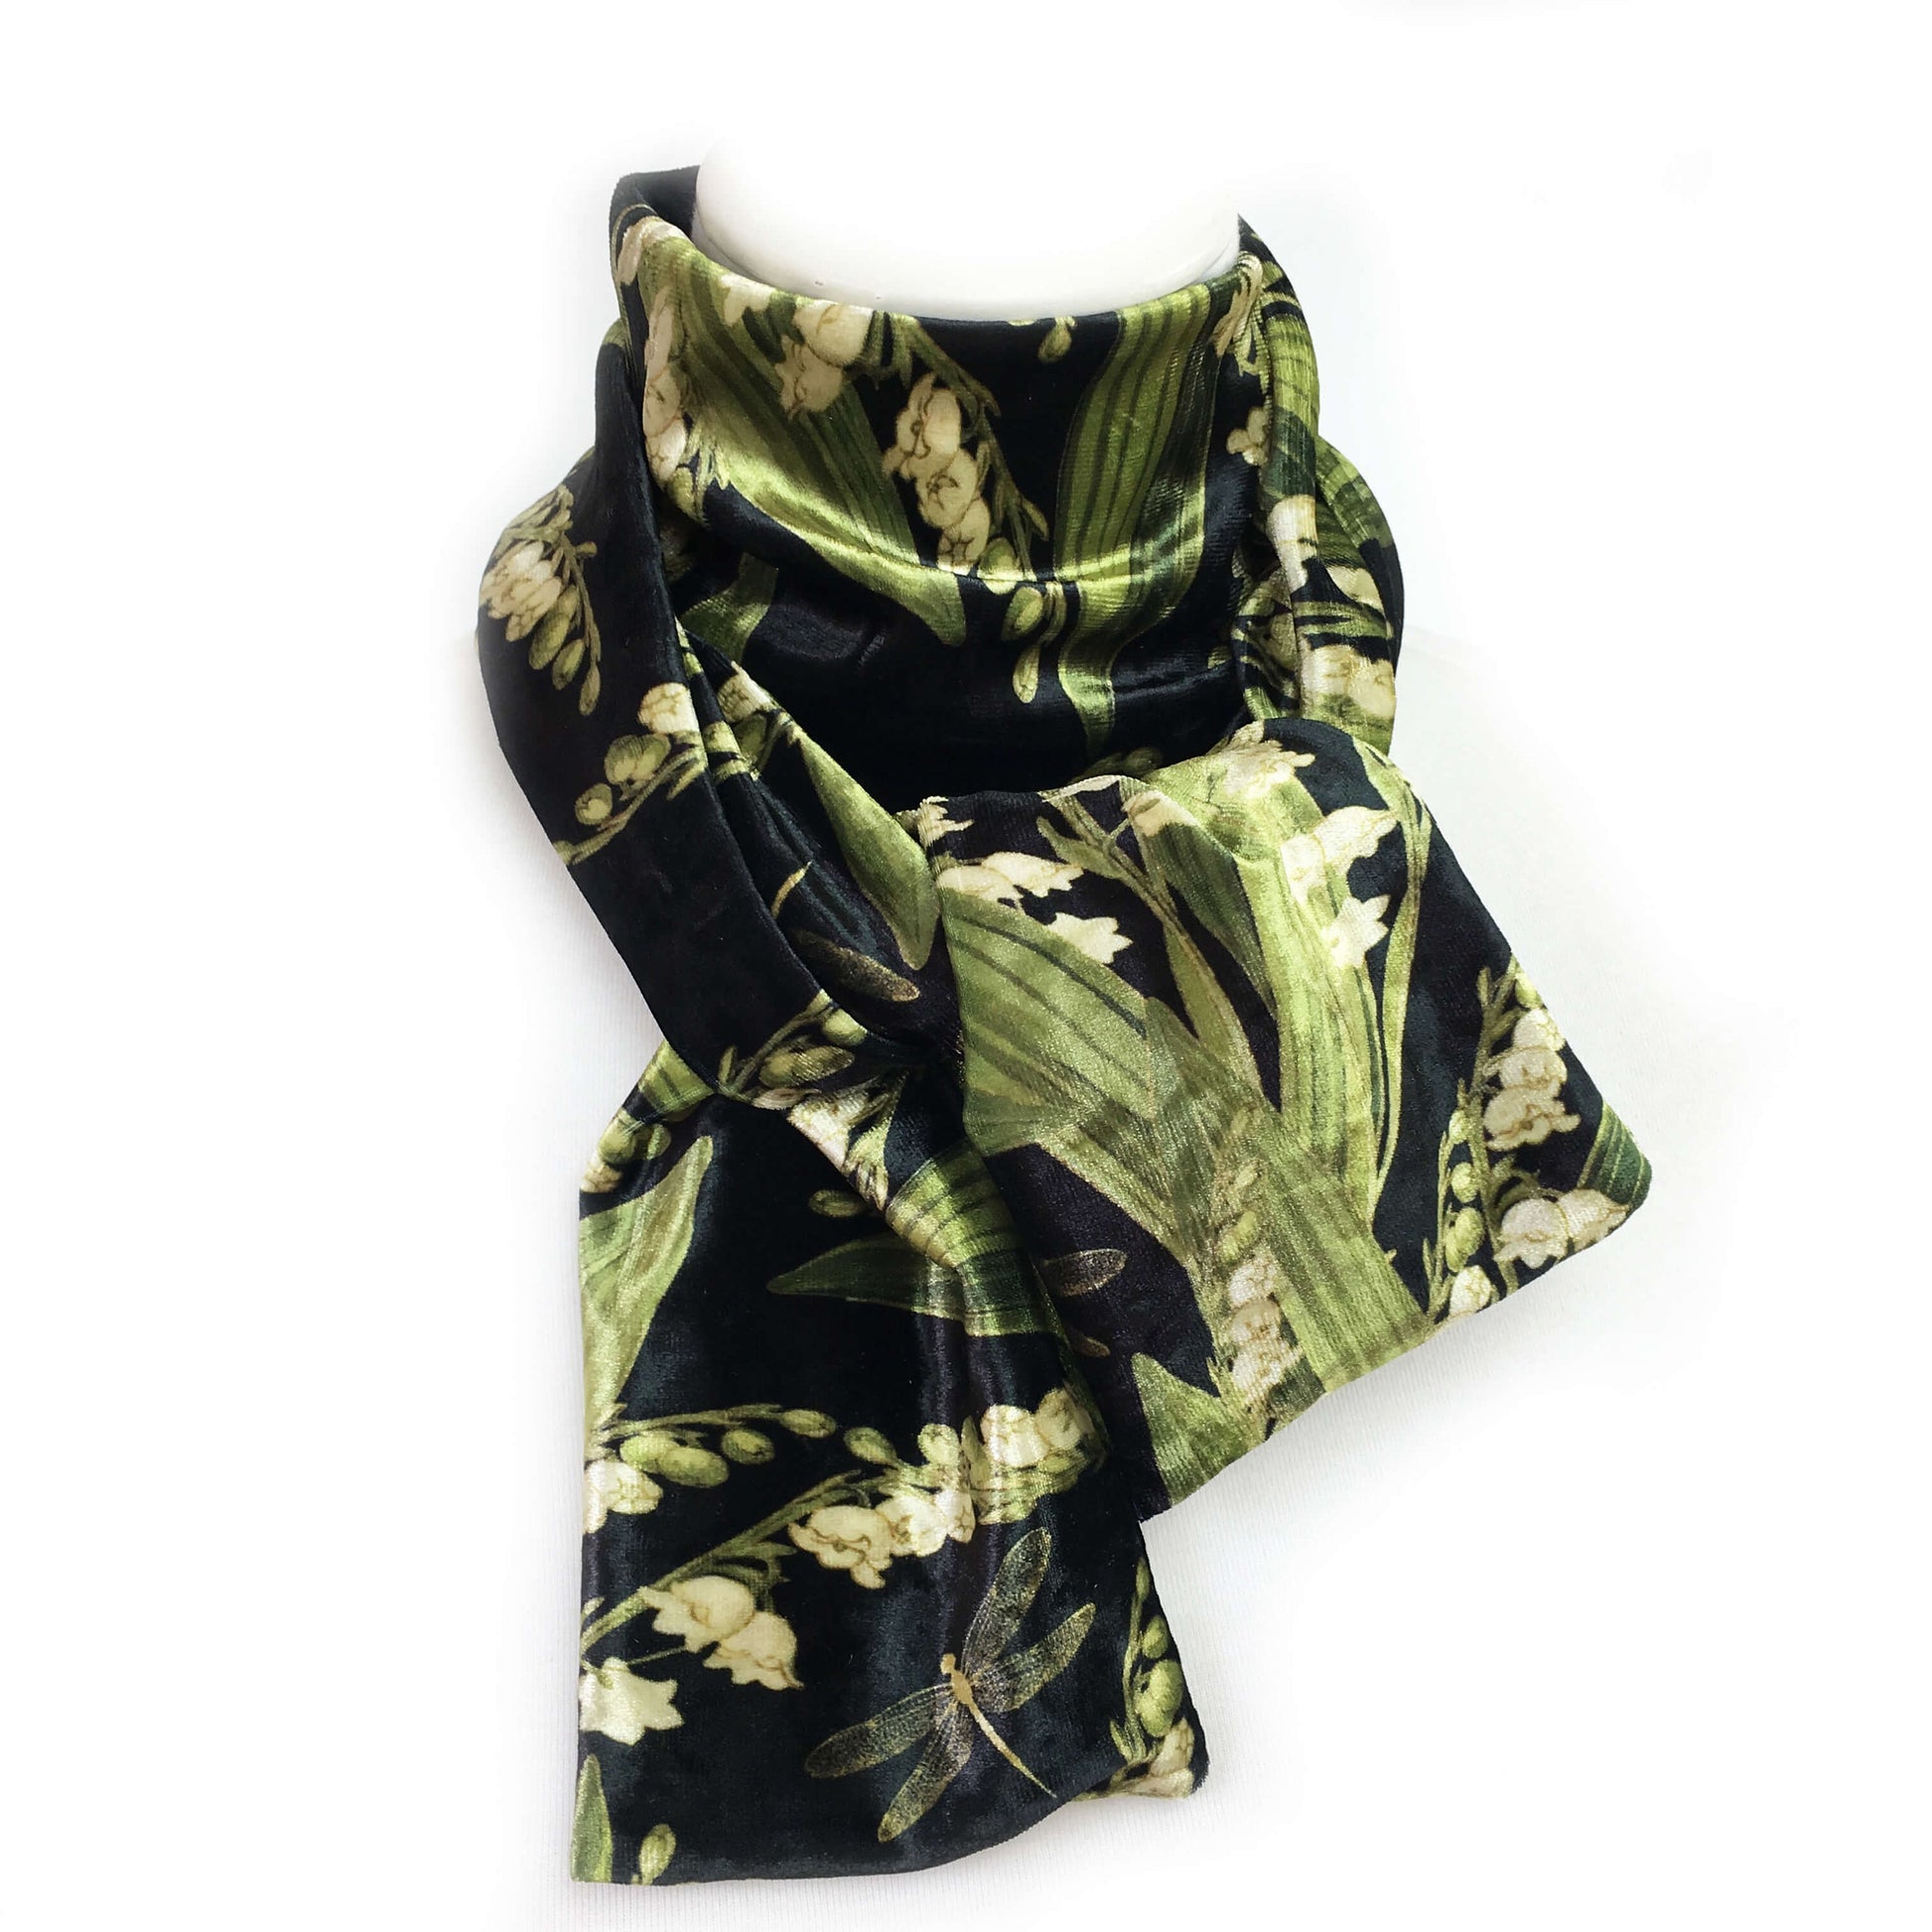 Lily-of-the-Valley Dragonfly Velour Scarf, Womans Scarf, All season, Luminous Scarf, hand painted artist scarf, Wear all day or evening